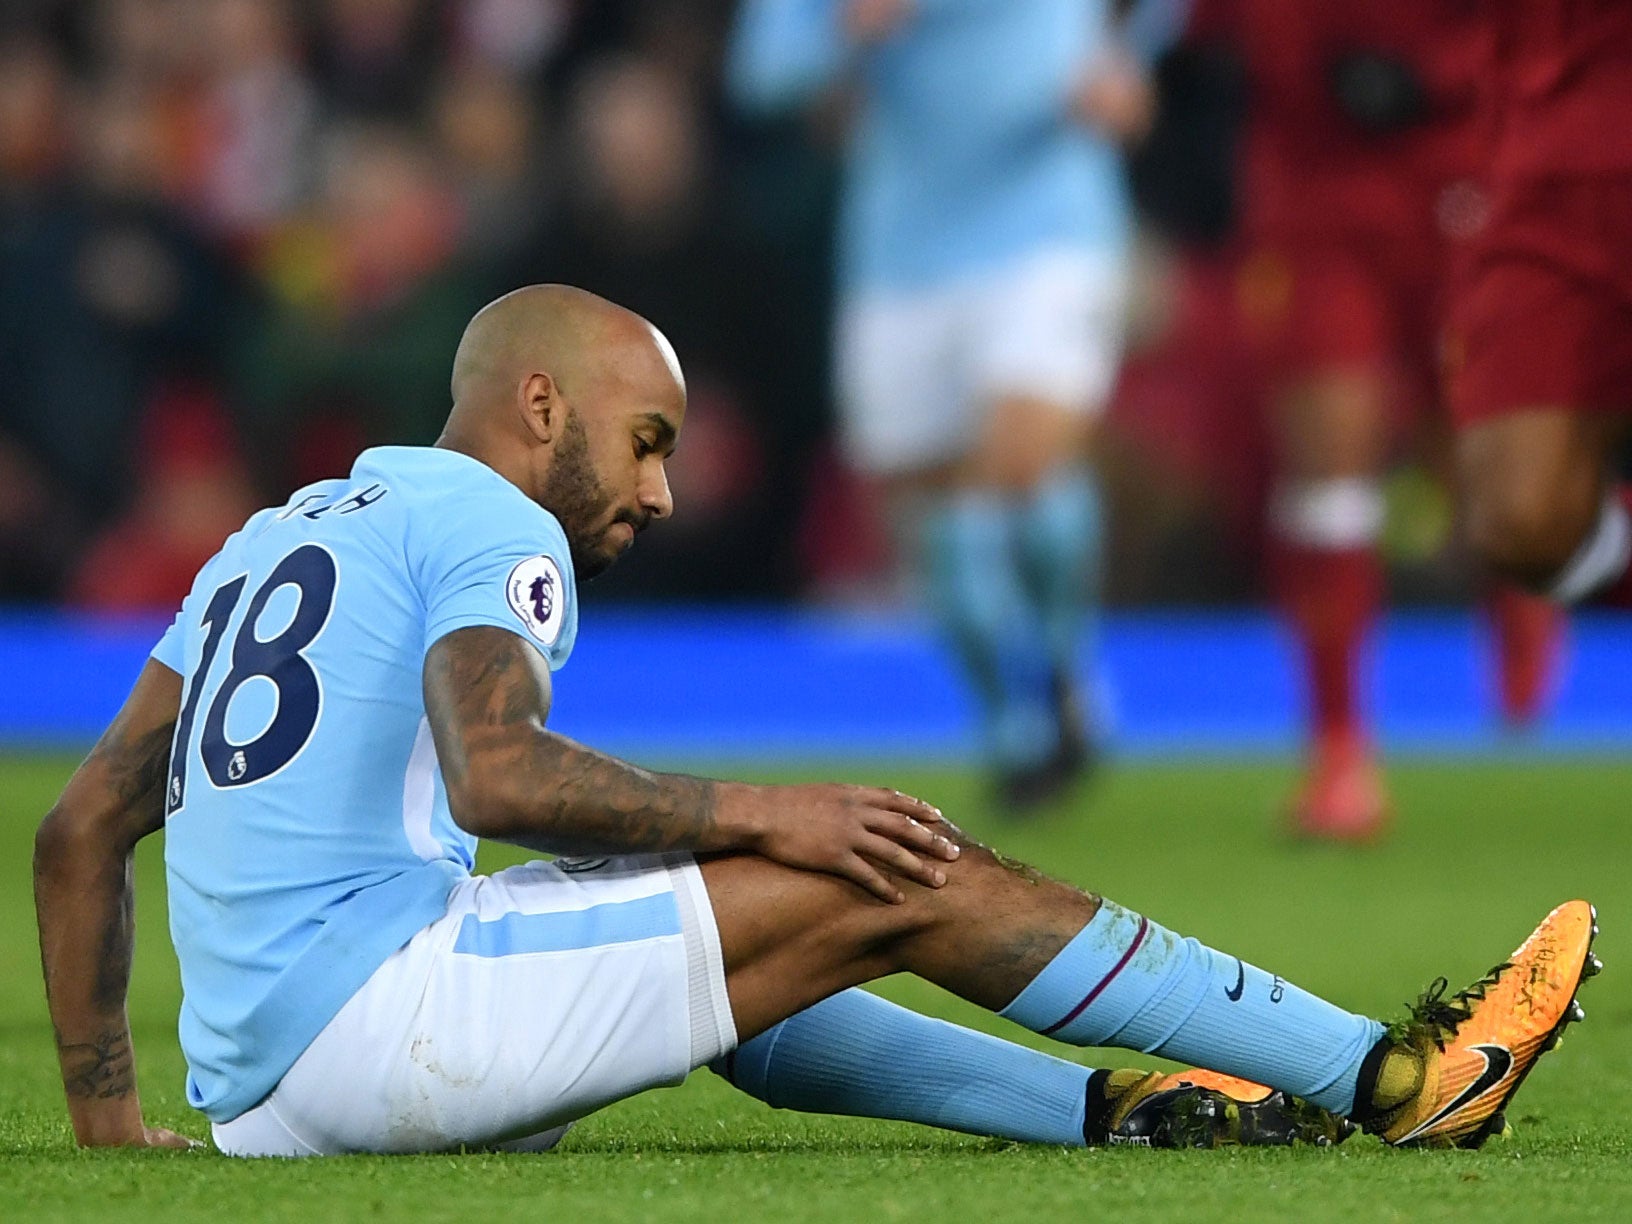 Fabian Delph went down with a knee problem shortly after the half hour mark